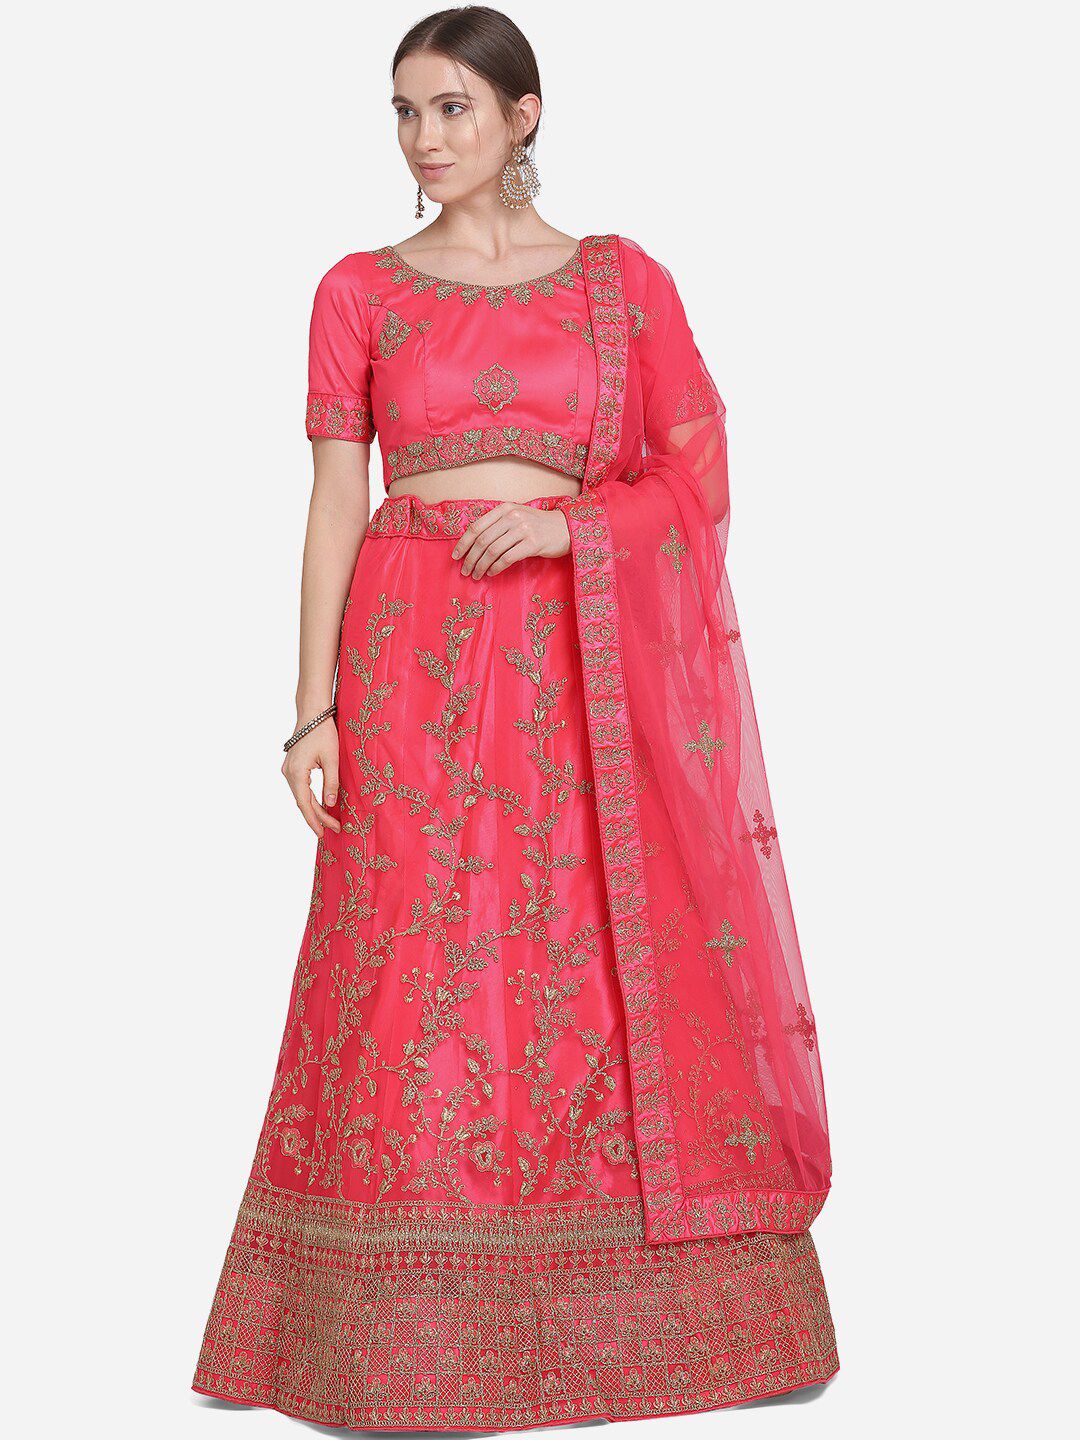 VRSALES Coral & Gold-Toned Embroidered Semi-Stitched Lehenga & Unstitched Blouse with Dupatta Price in India